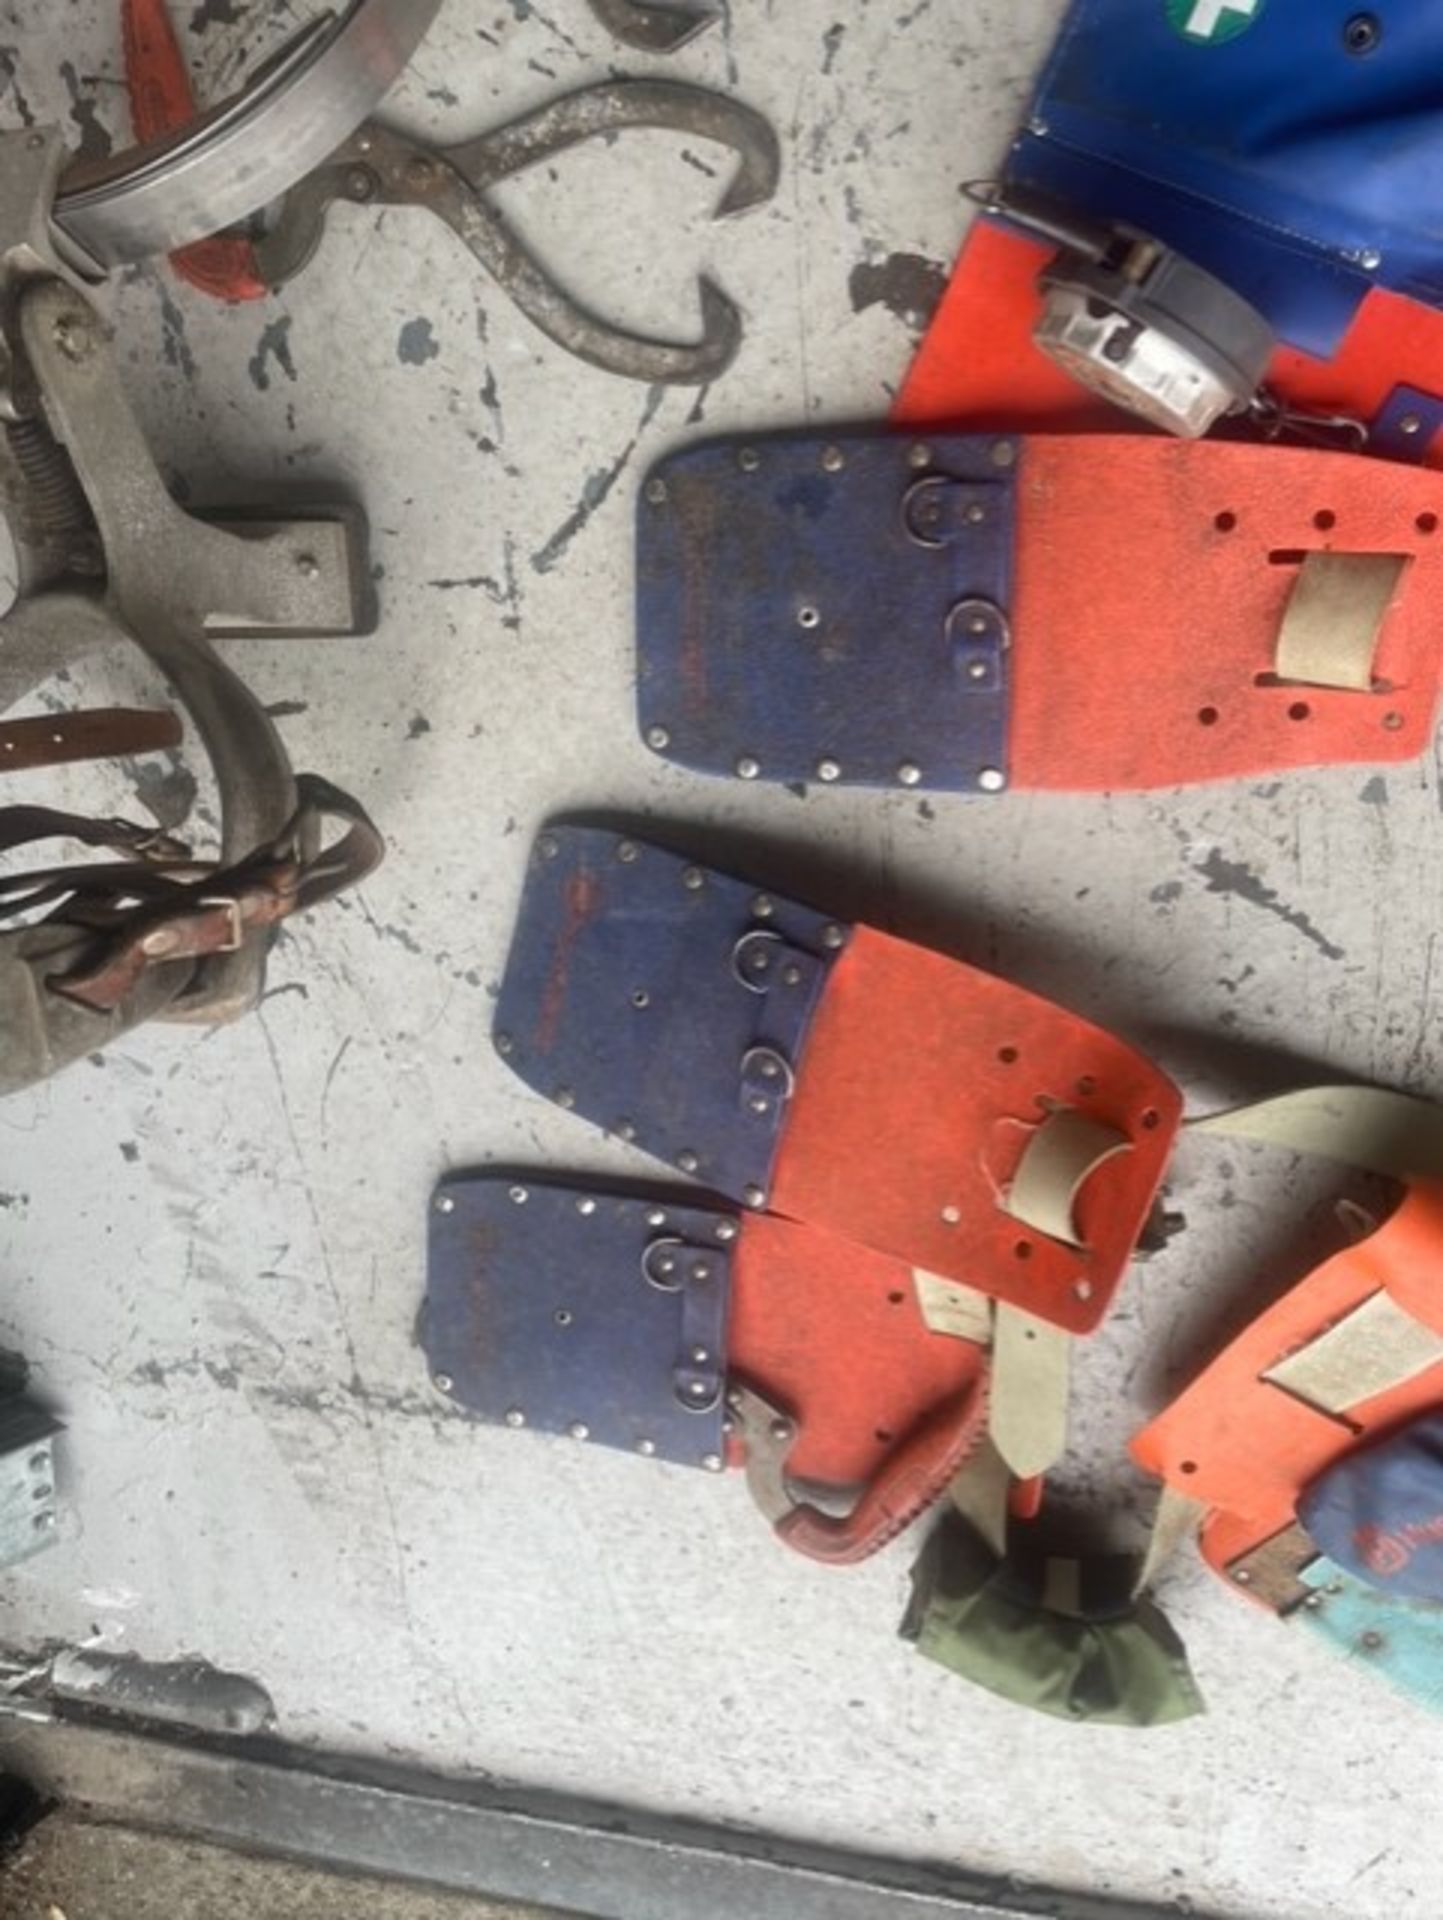 Tree surgeons tools forsips tapes wedges tool belts and climbing feet - Image 3 of 6